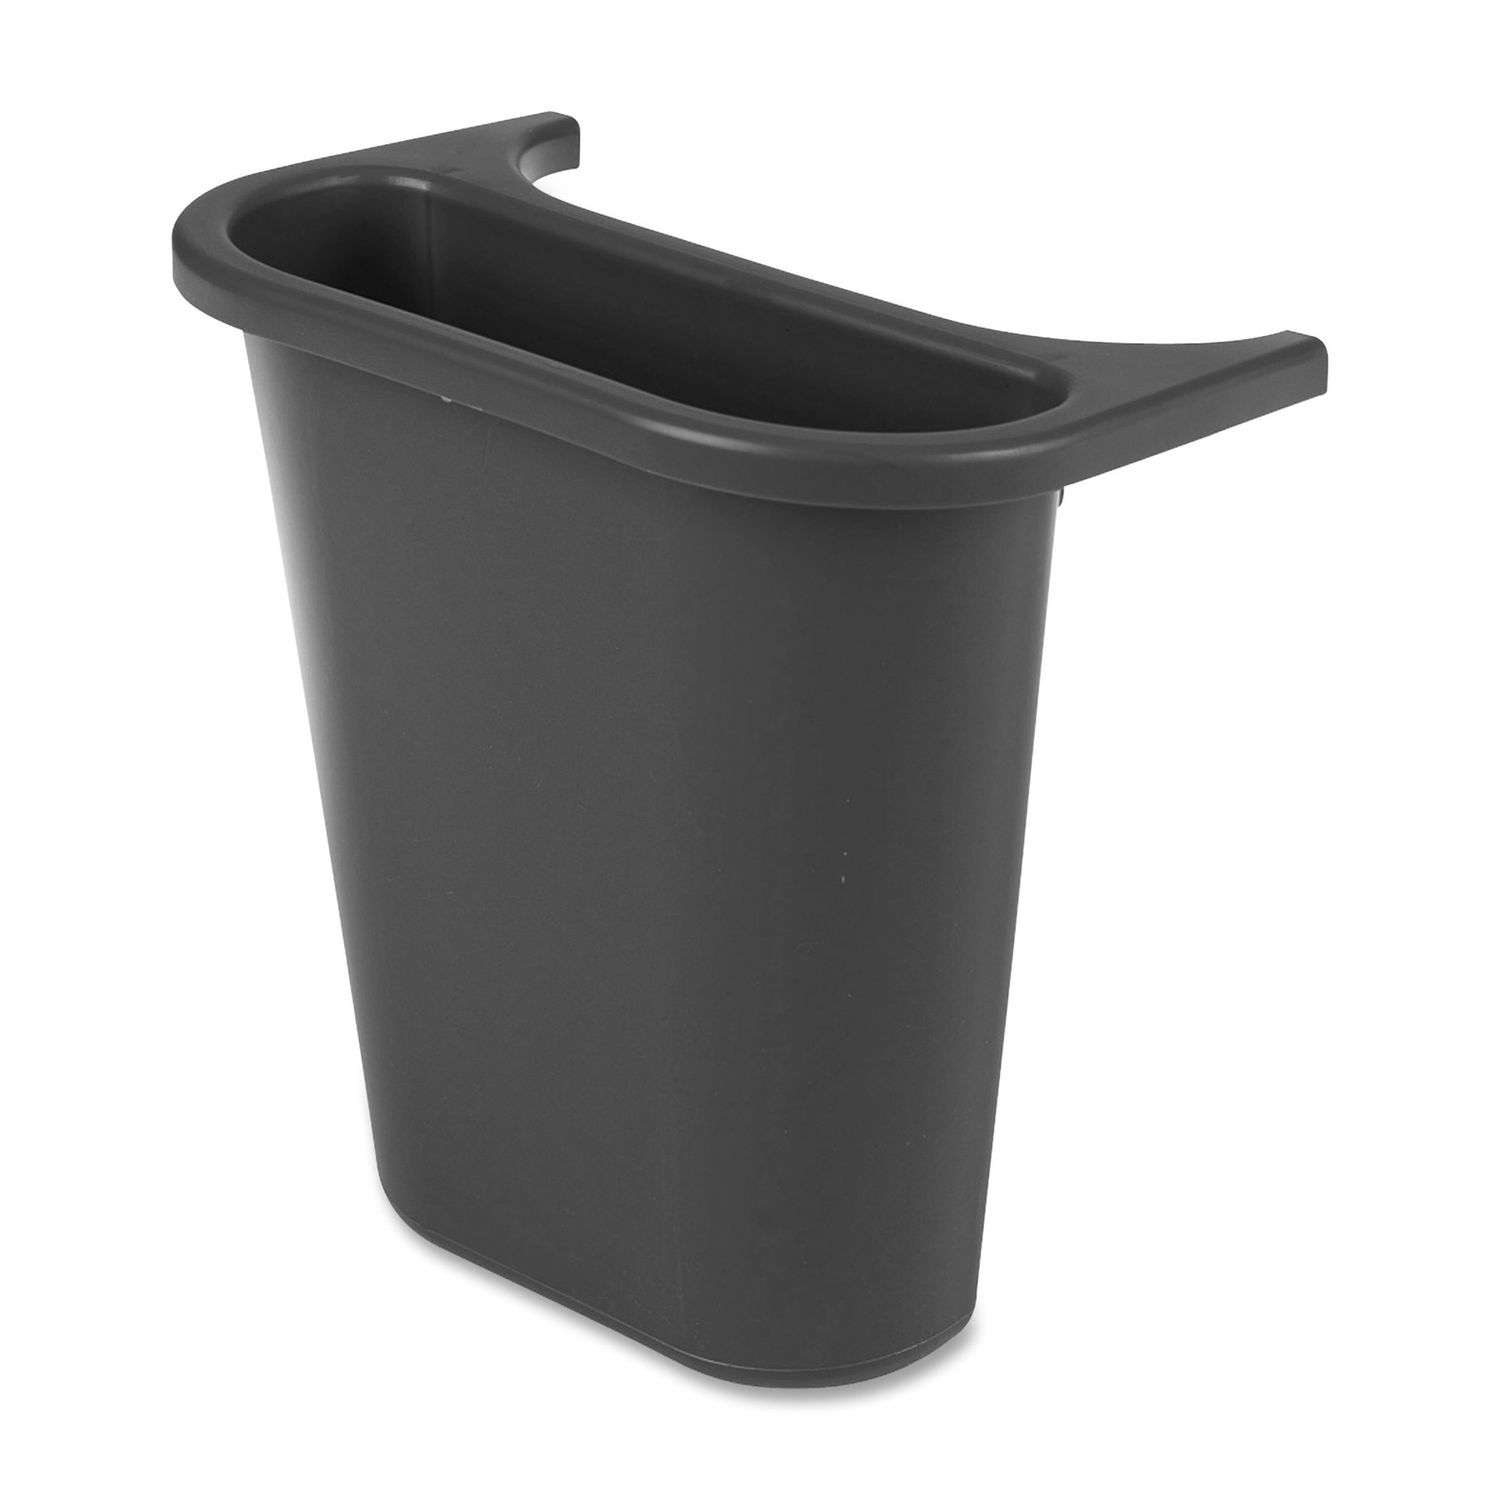 Saddlebasket Recycling Side Bin 1.19 gal Capacity, Rectangular, Chip Resistant, Rust Resistant, Dent Resistant, Easy to Clean, 11.5" Height x 7.3" Width x 10.6" Depth, Plastic, Black, 12 / Carton